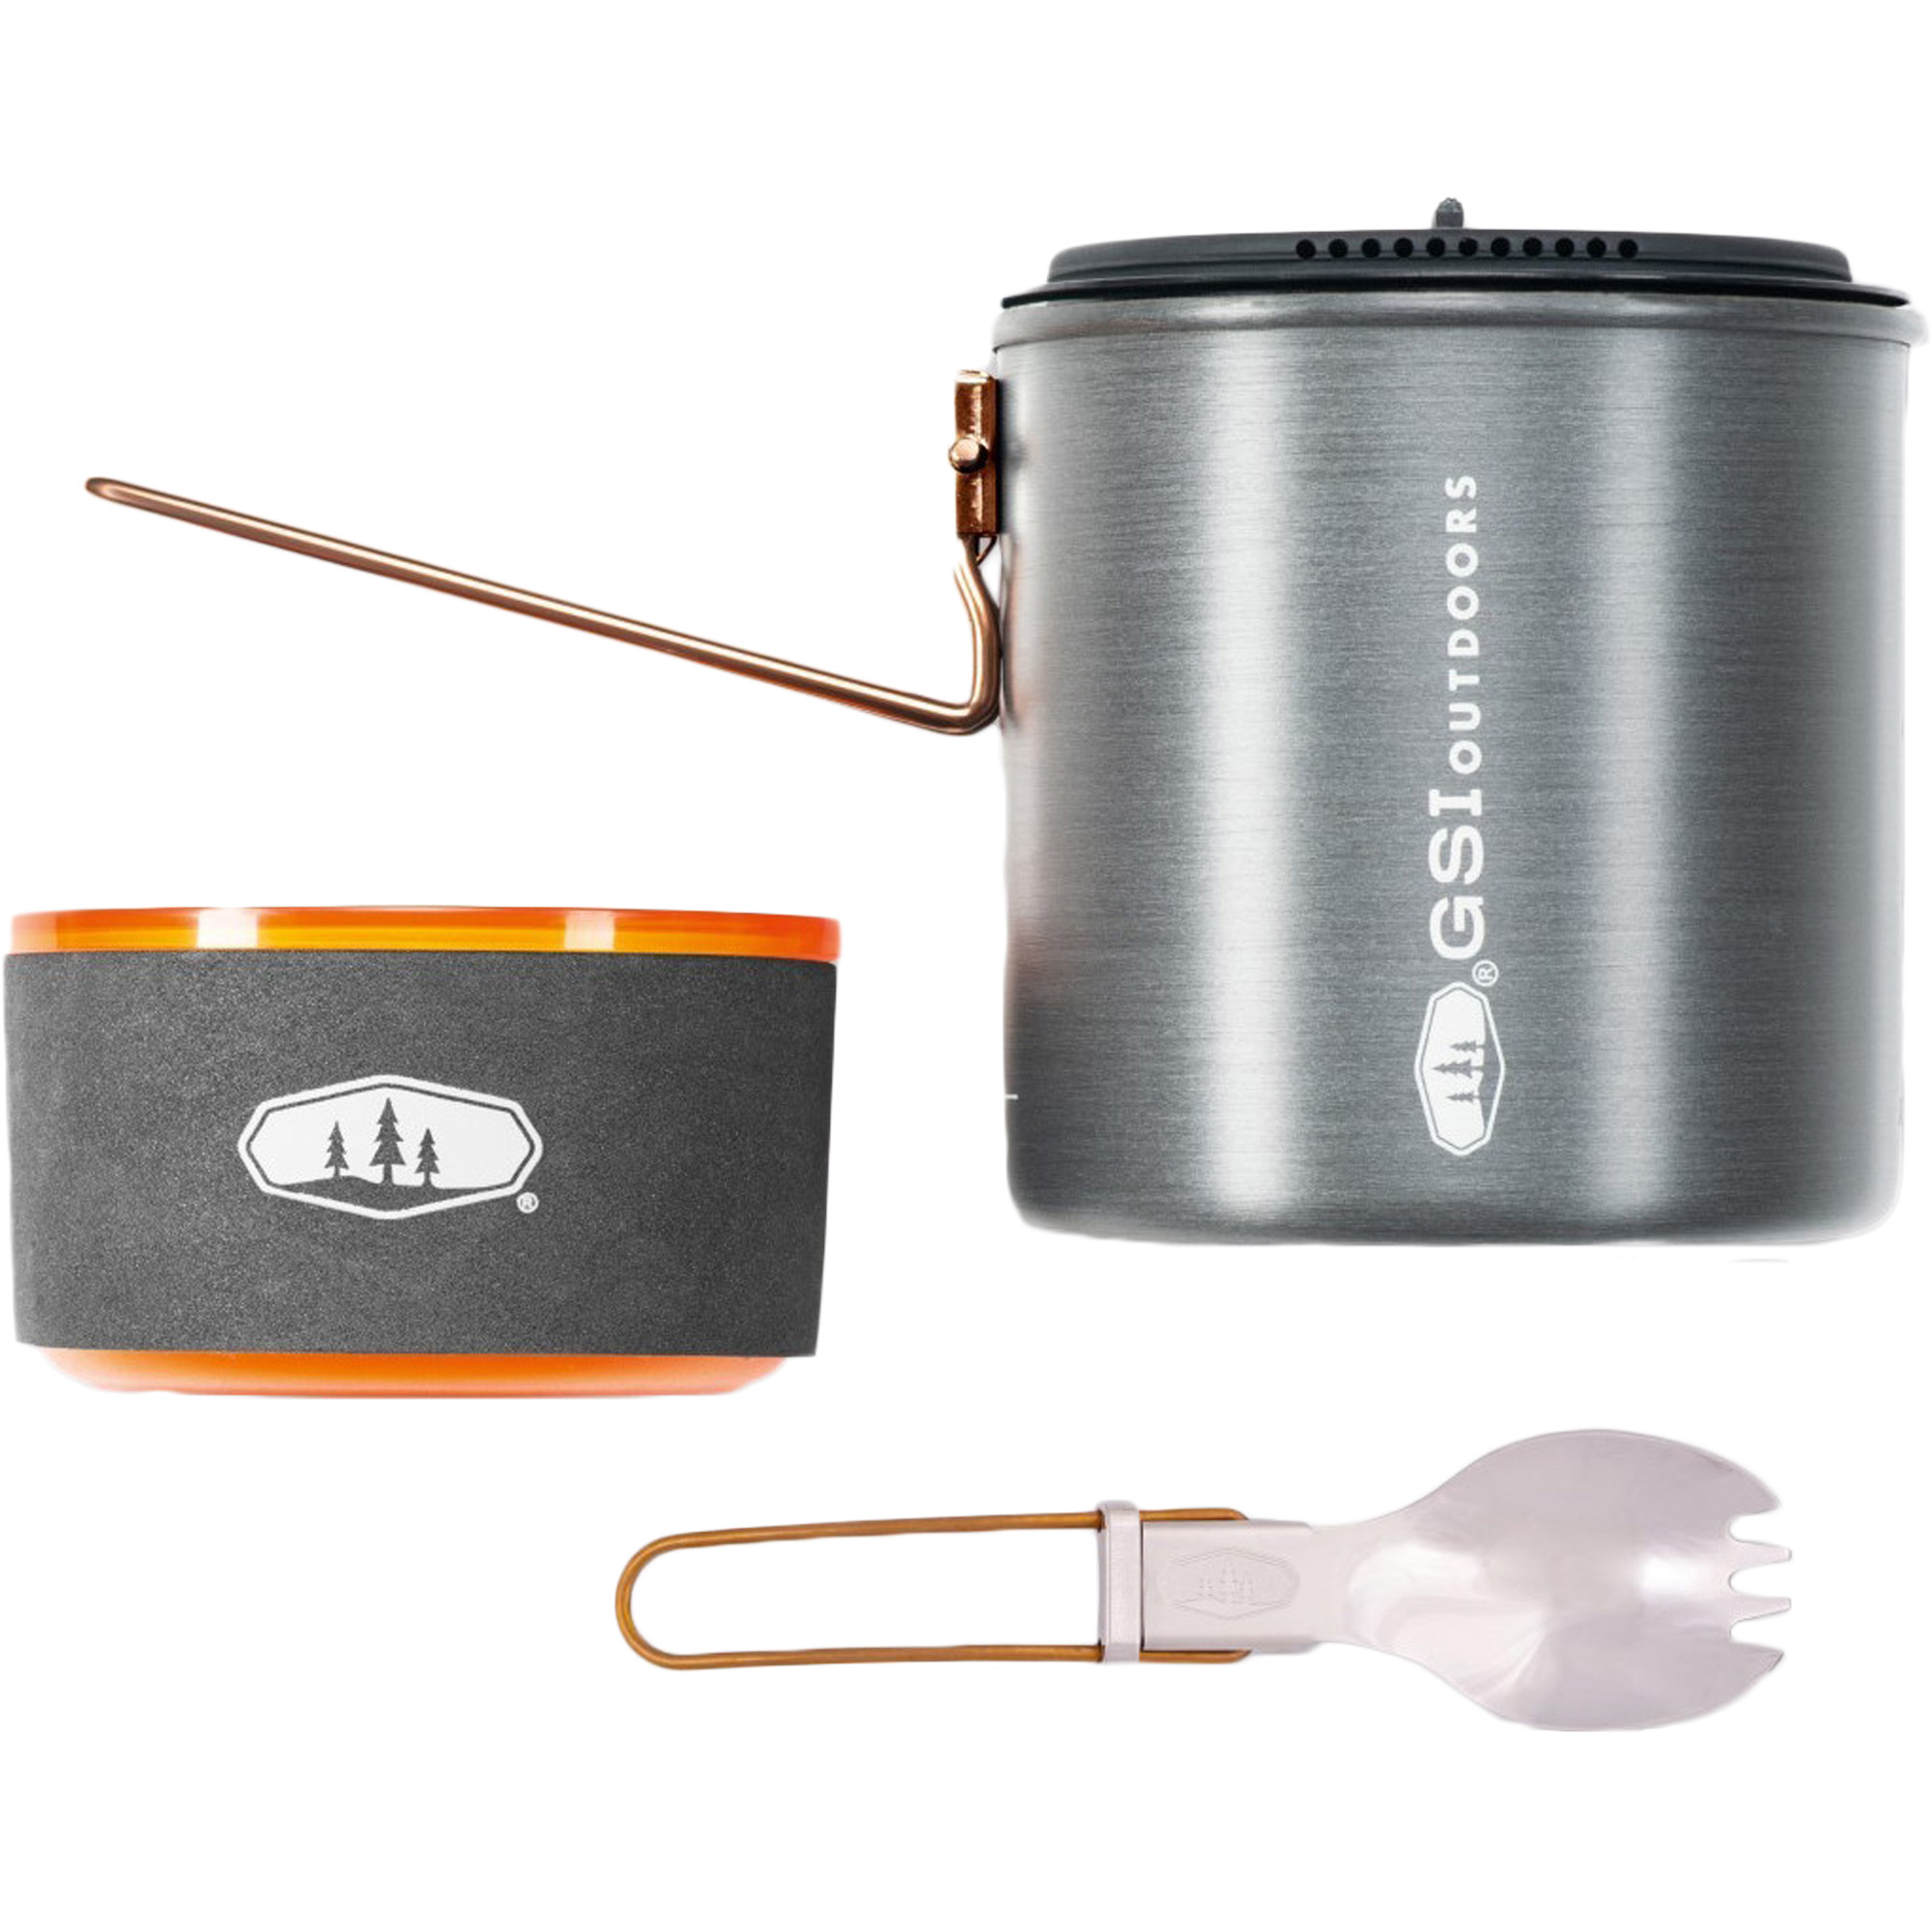 GSI Outdoors Halulite Soloist Camping Cookware